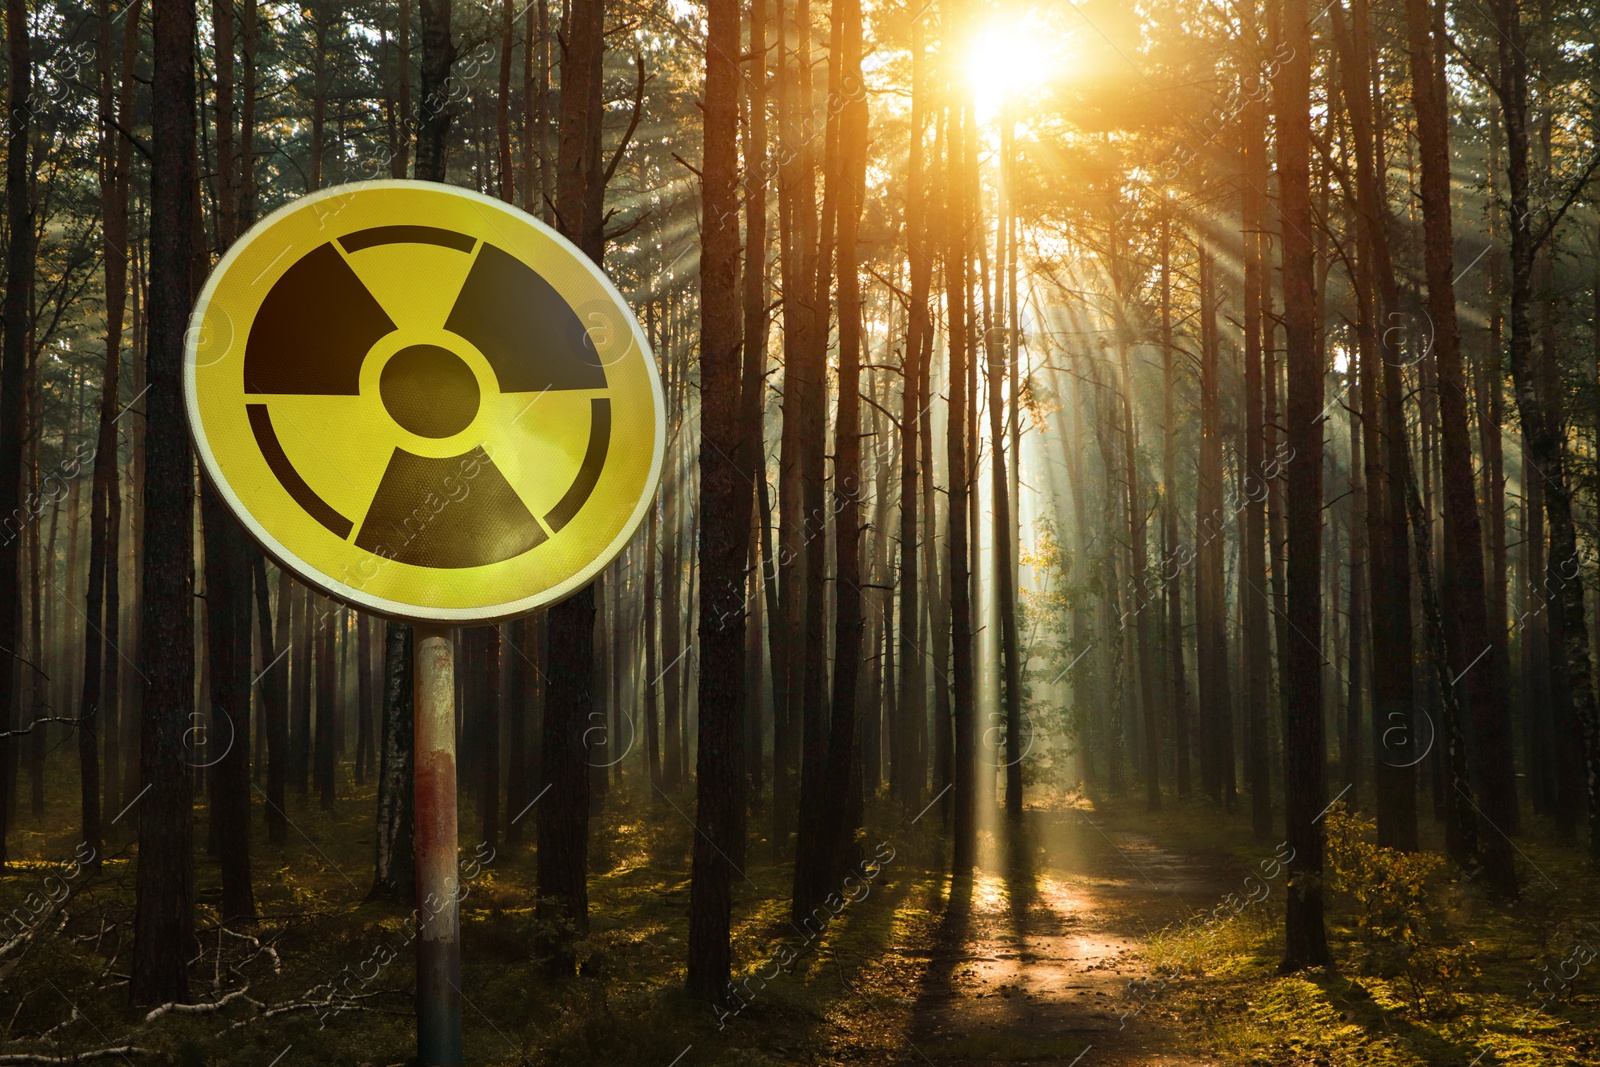 Image of Radioactive pollution. Yellow warning sign with hazard symbol near contaminated area in forest. Space for text